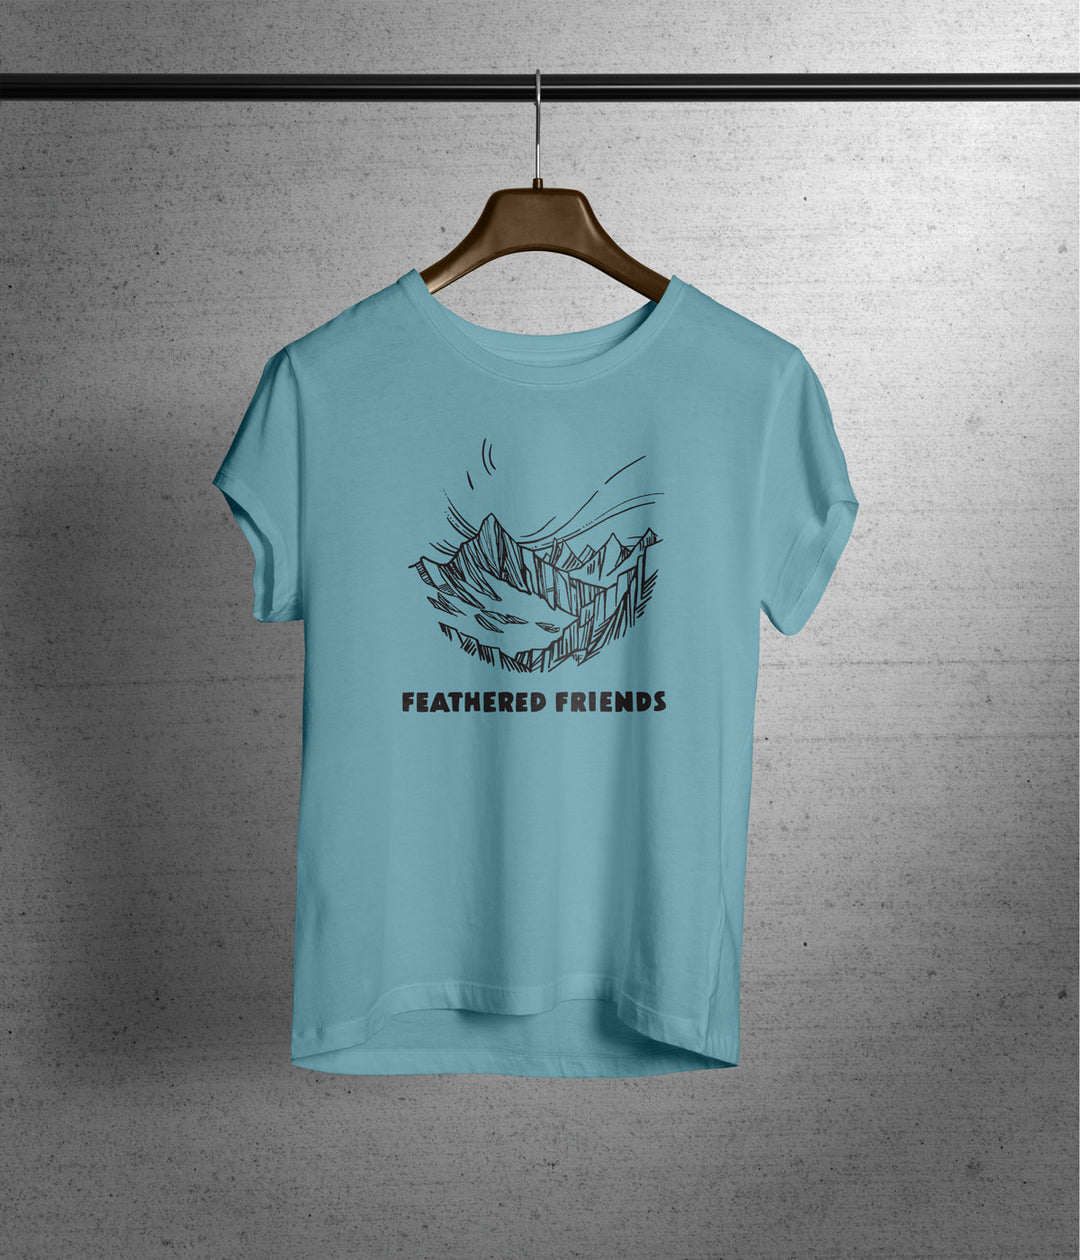 Feathered Friends Merch